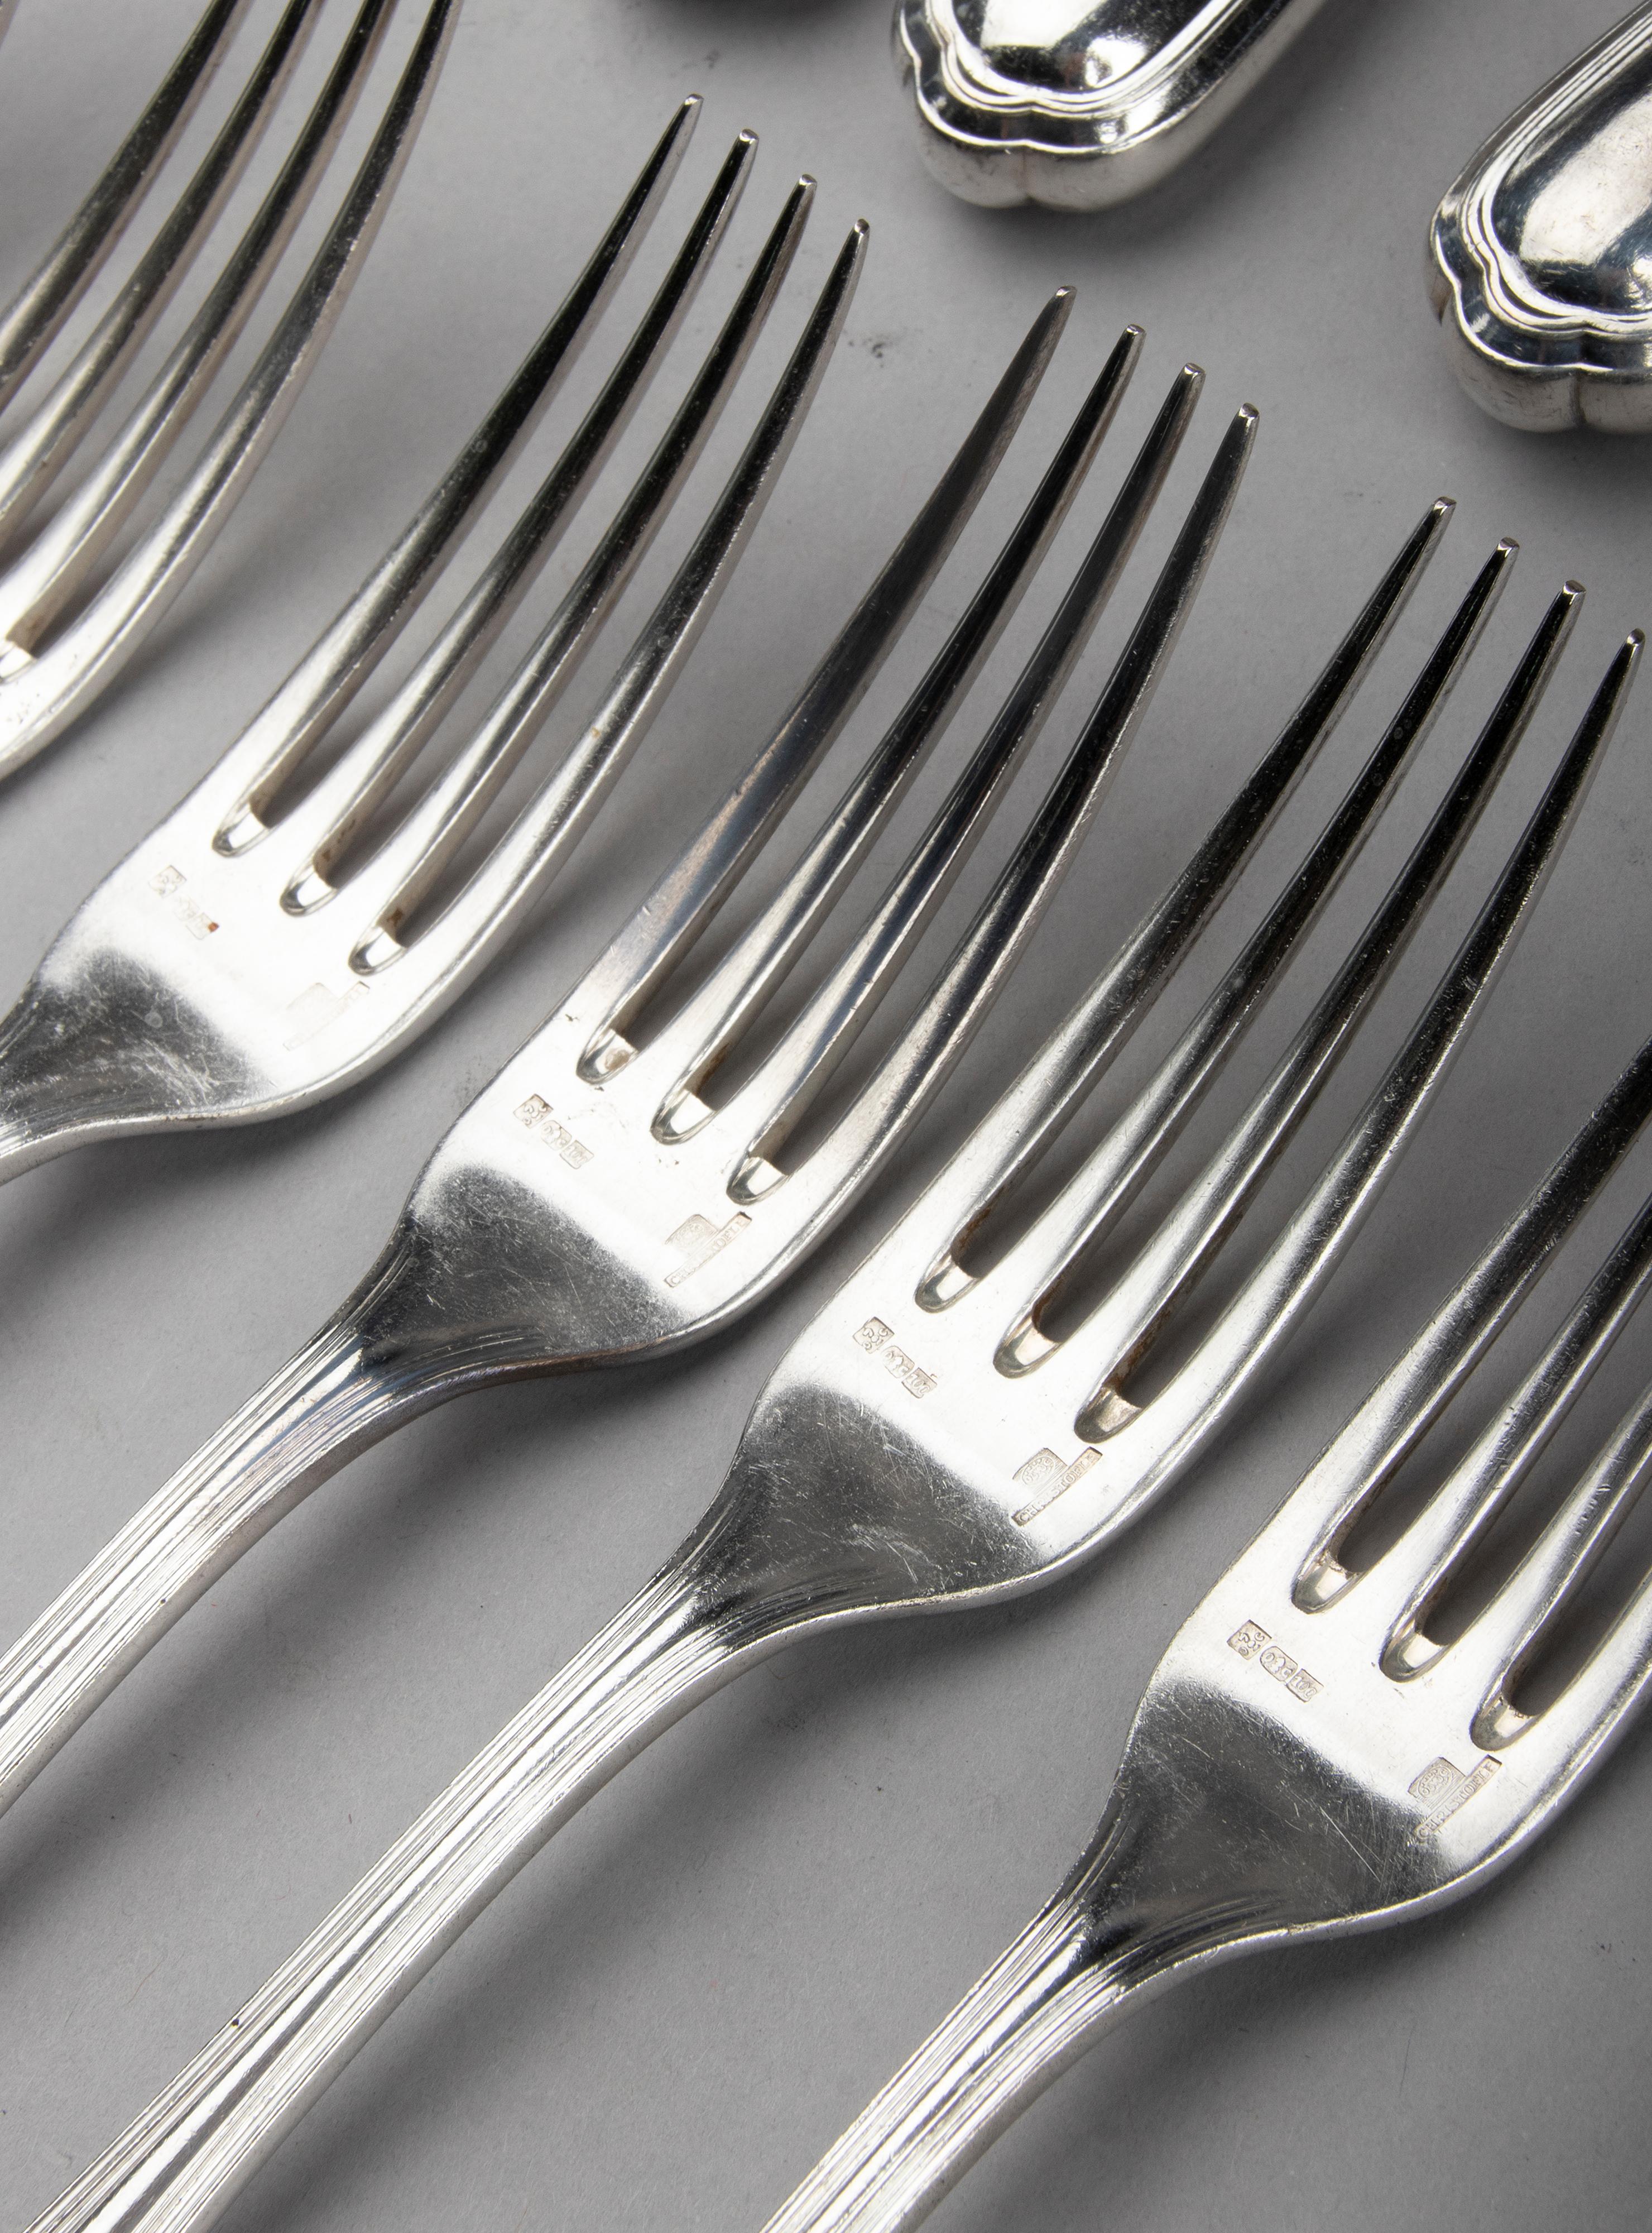 30-Piece Set of Silver Plated Flatware Made by Christofle Model Spatours 9